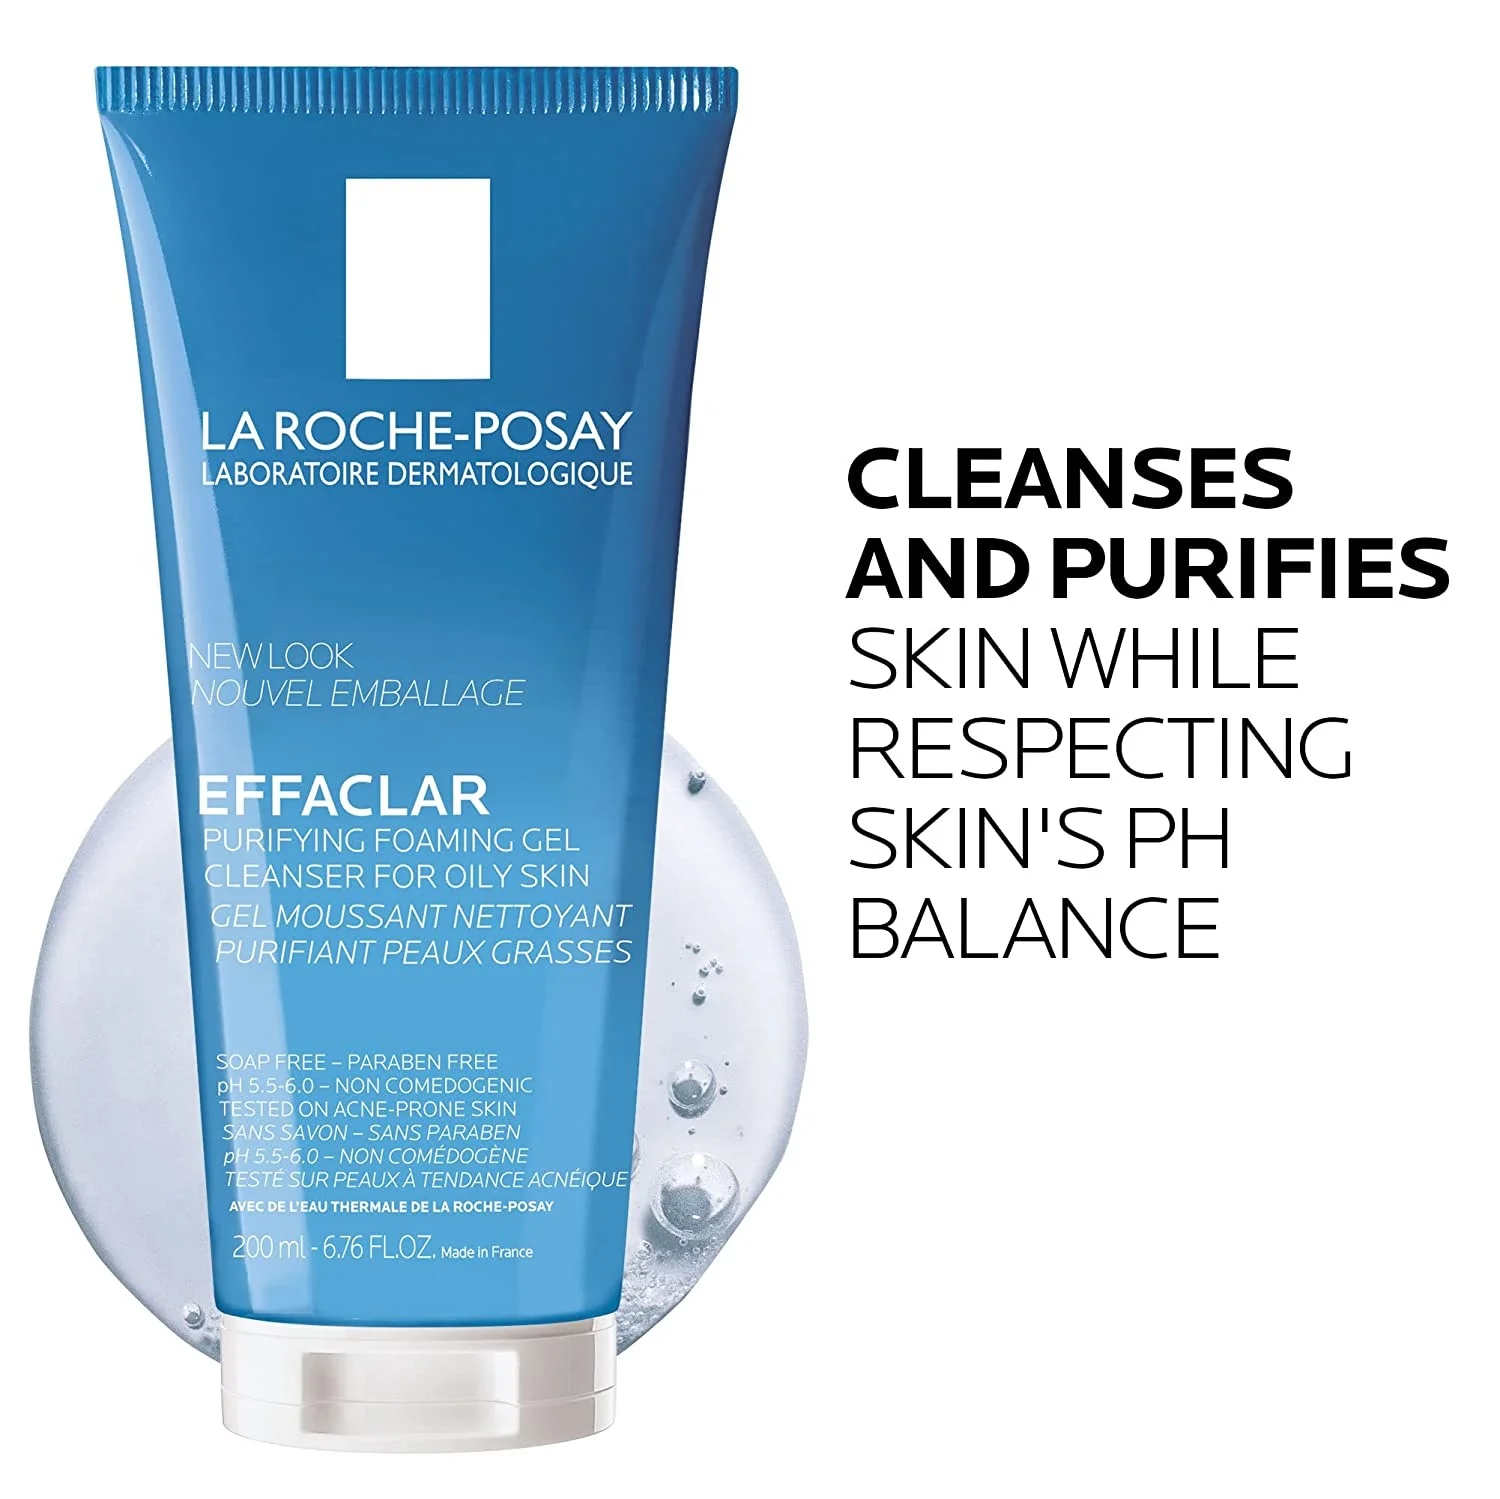 

La Roche-Posay Effaclar Purifying Foaming Gel Cleanser Moisturizing Face Wash Pores Cleaning Oil Free For Sensitive Skin 200ml